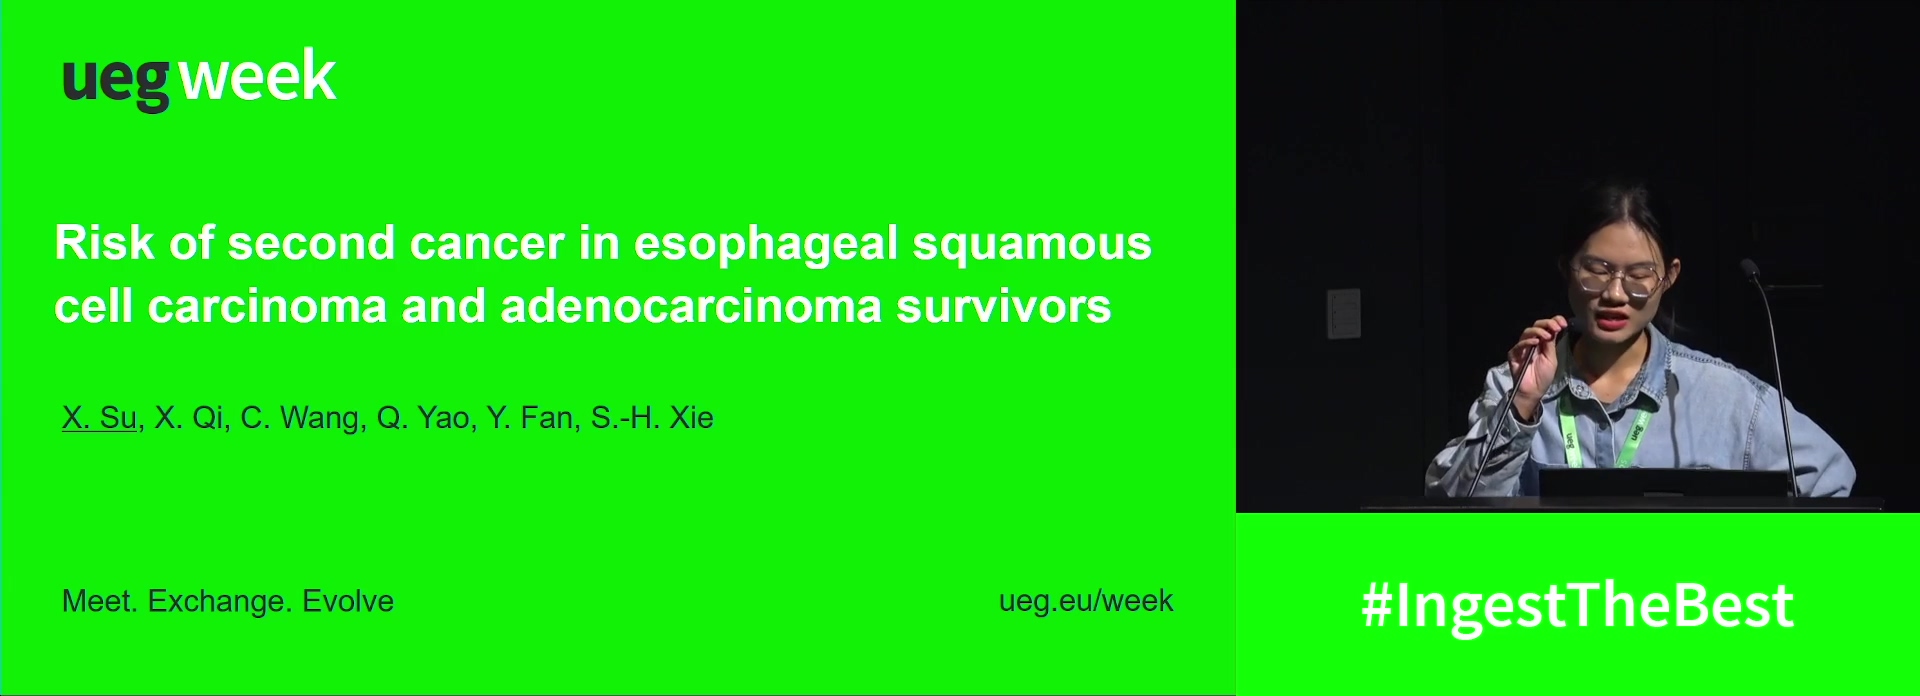 RISK OF SECOND CANCER IN ESOPHAGEAL SQUAMOUS CELL CARCINOMA AND ADENOCARCINOMA SURVIVORS: A POPULATION-BASED ANALYSIS IN SEER DATASET